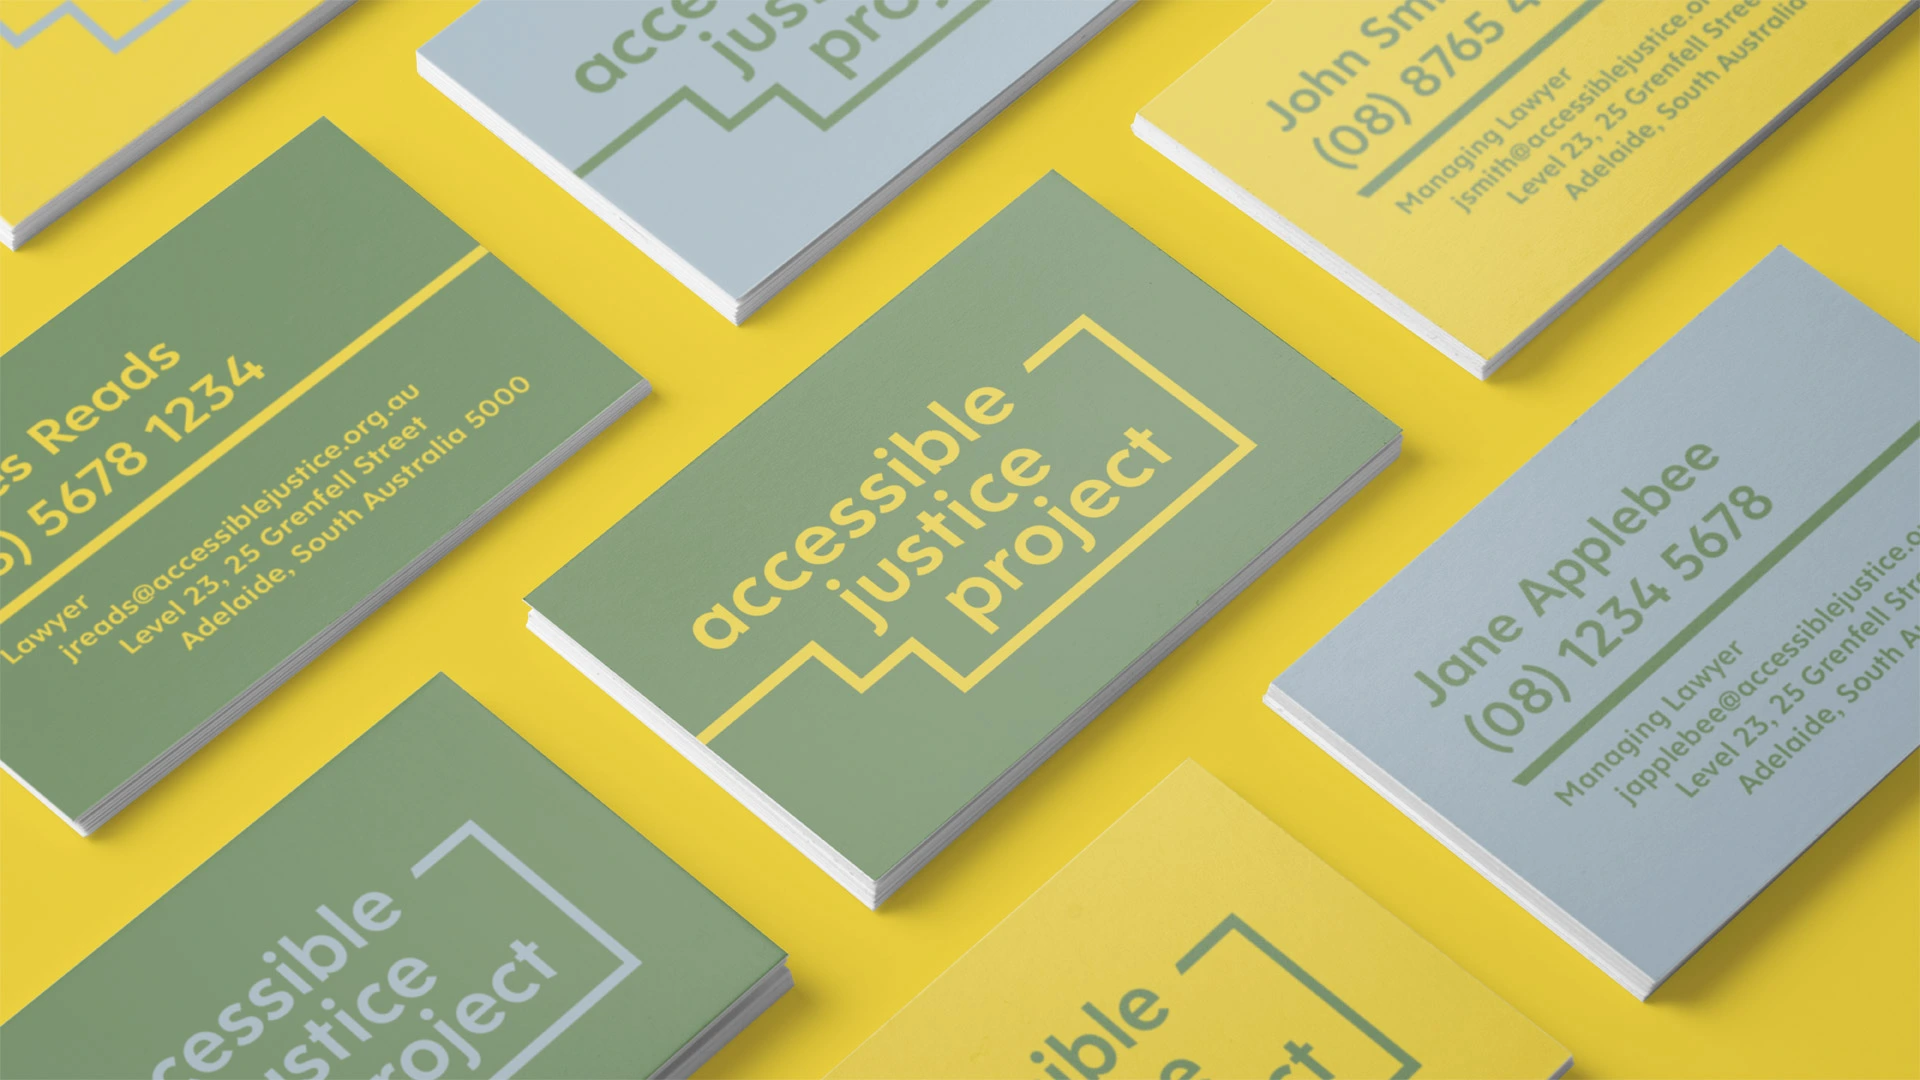 Accessible Justice Project business cards